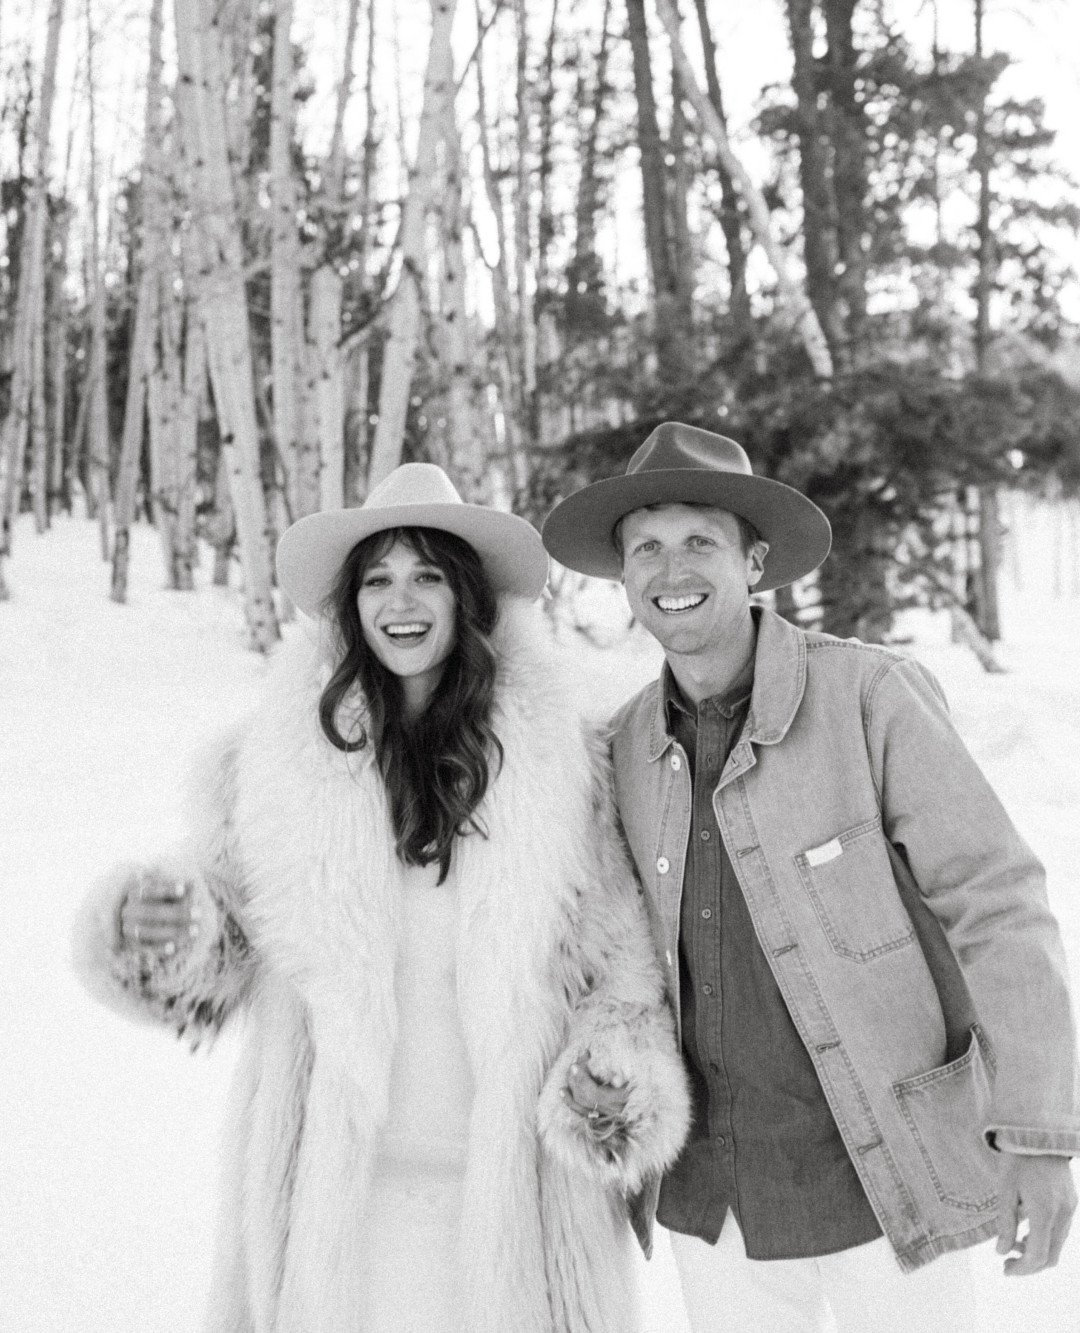 We may have packed up our winter coats, but this snow filled photoshoot deserved a spot on our grid. How chic is this @gobelladesign couple?